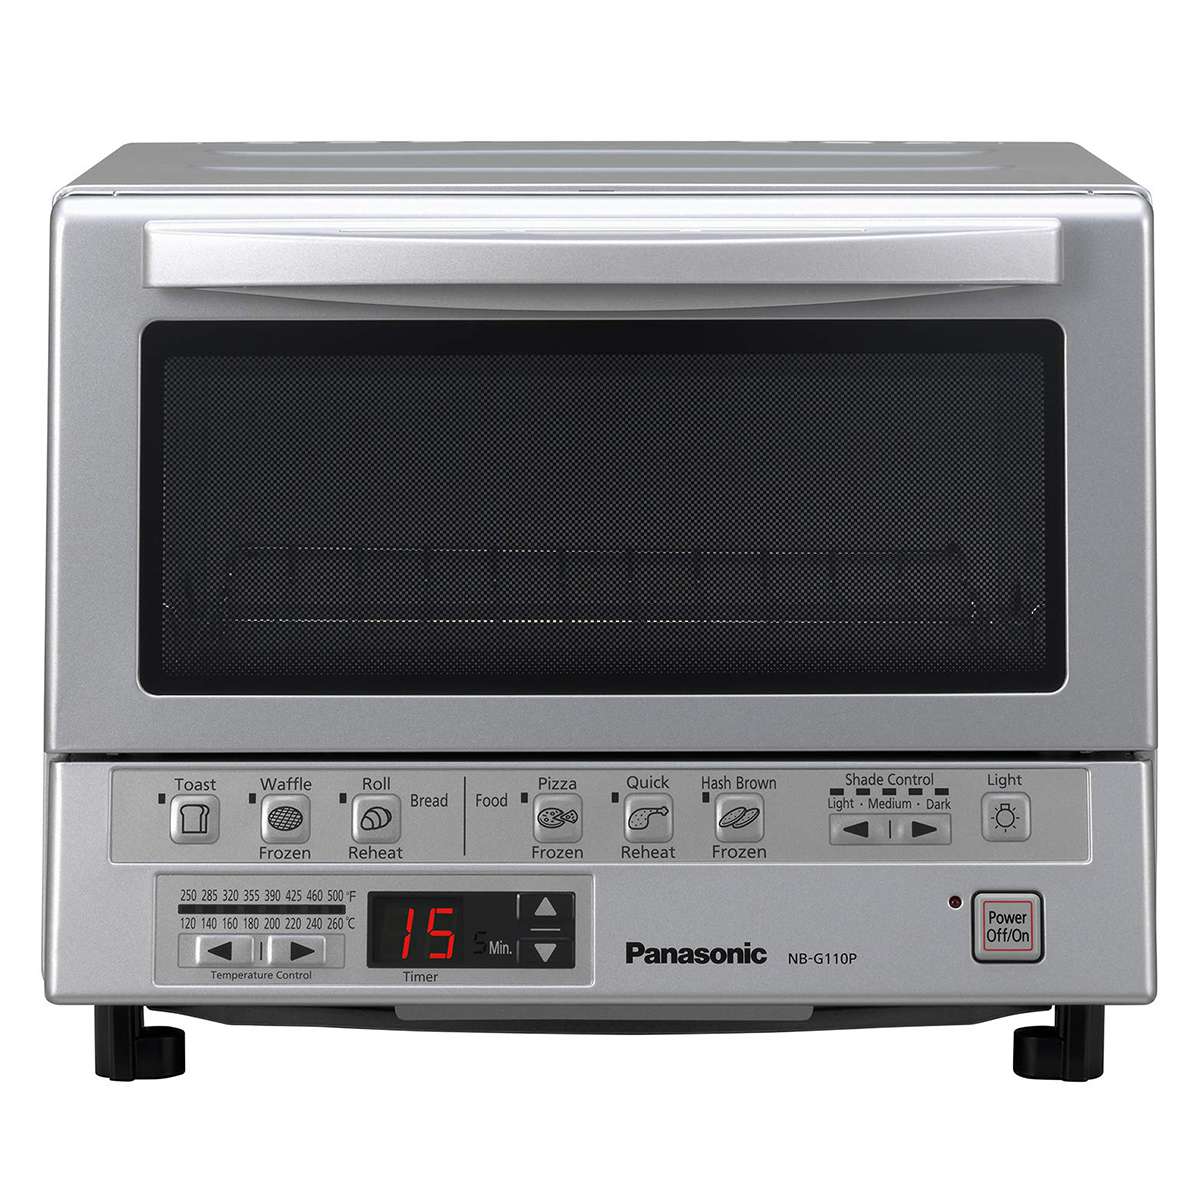 Best Option With Infrared Heating: Panasonic Toaster Oven NB-G110P